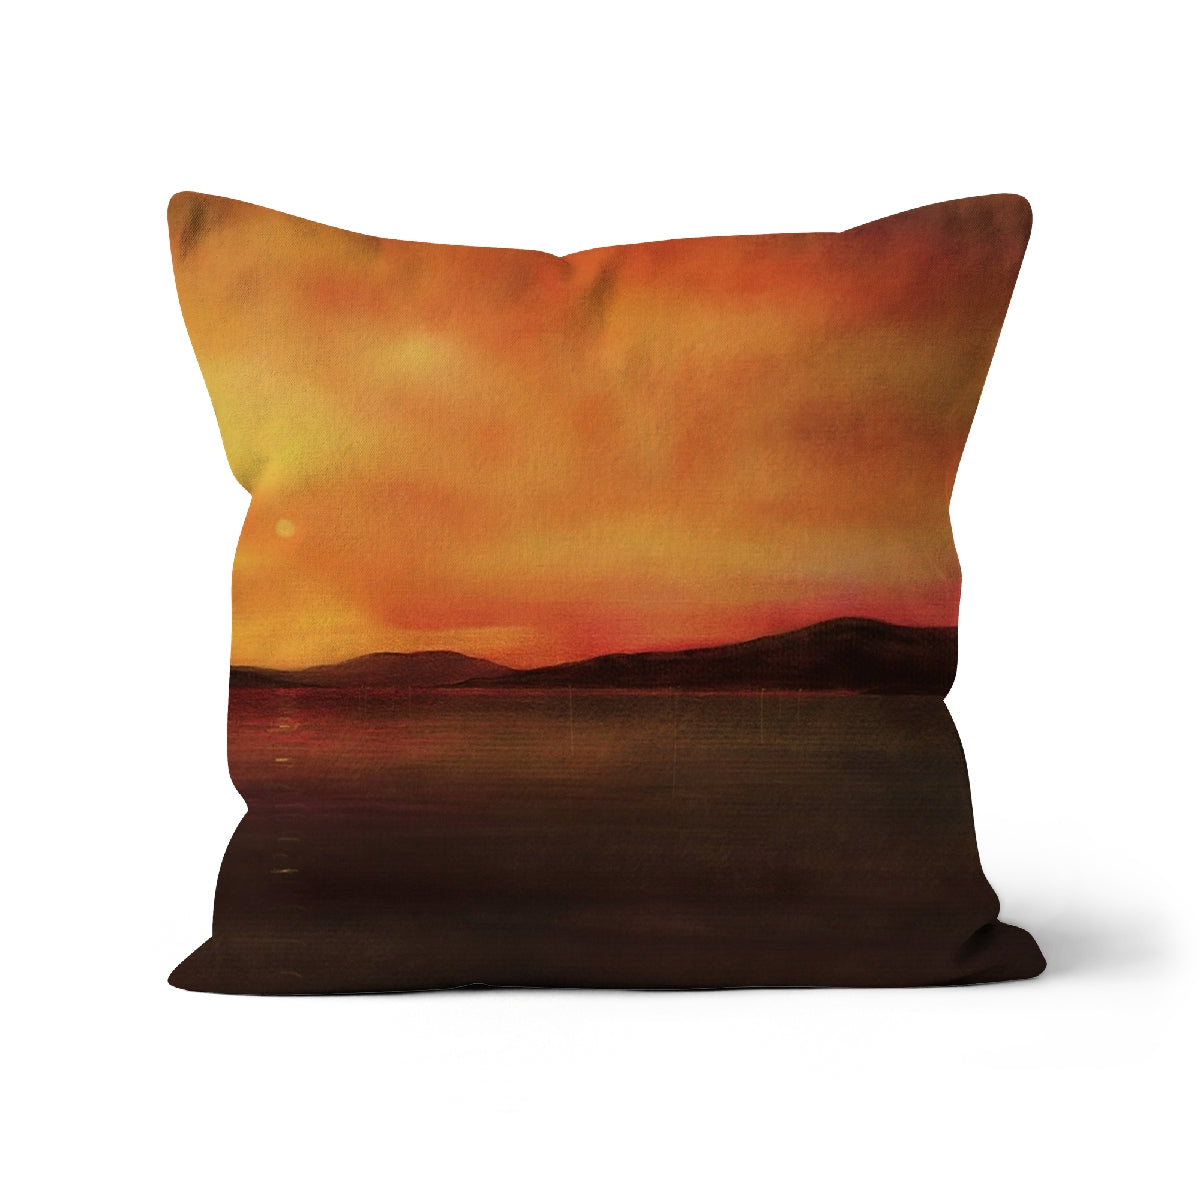 Harris Sunset Art Gifts Cushion-Cushions-Hebridean Islands Art Gallery-Canvas-16"x16"-Paintings, Prints, Homeware, Art Gifts From Scotland By Scottish Artist Kevin Hunter